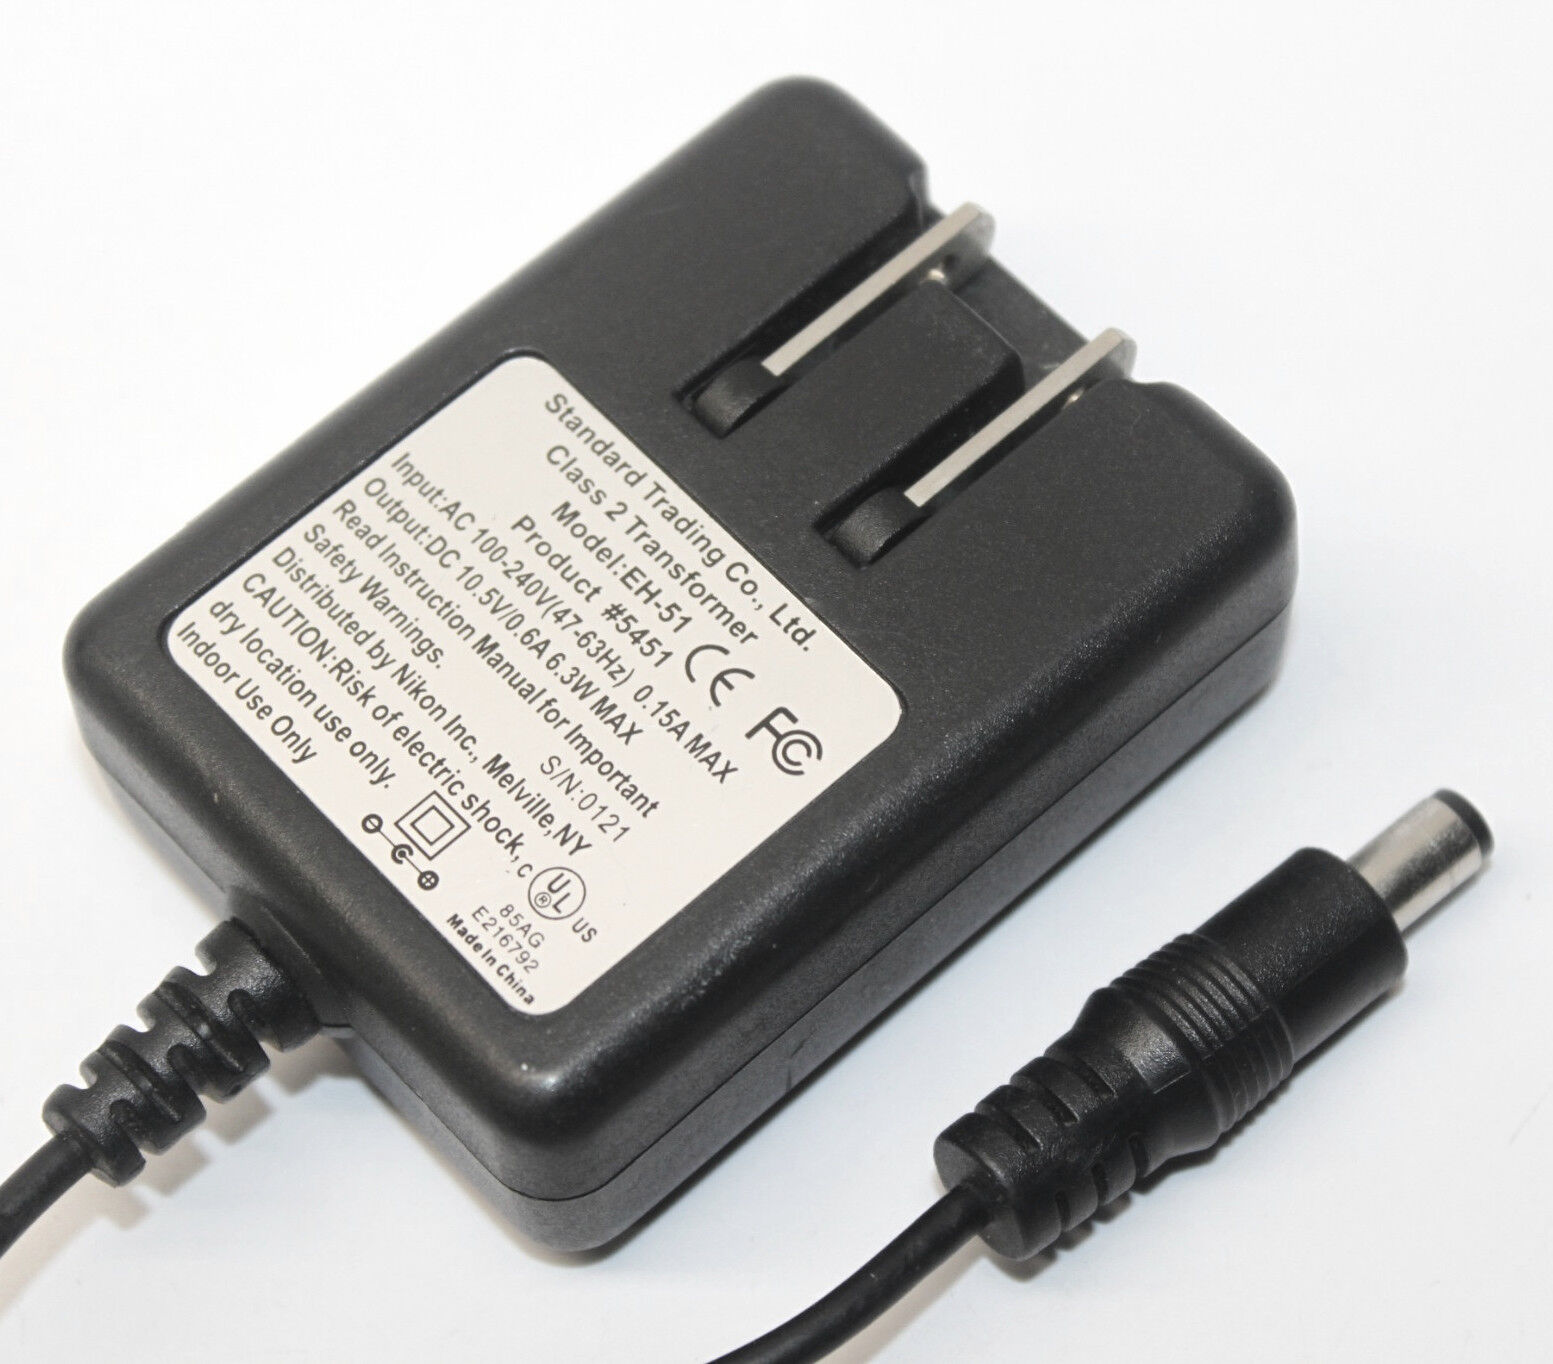 *Brand NEW* EH-51 Standard Trading Co Output DC 10.5V 0.6A AC Adapter Class 2 Transformer POWER Supply